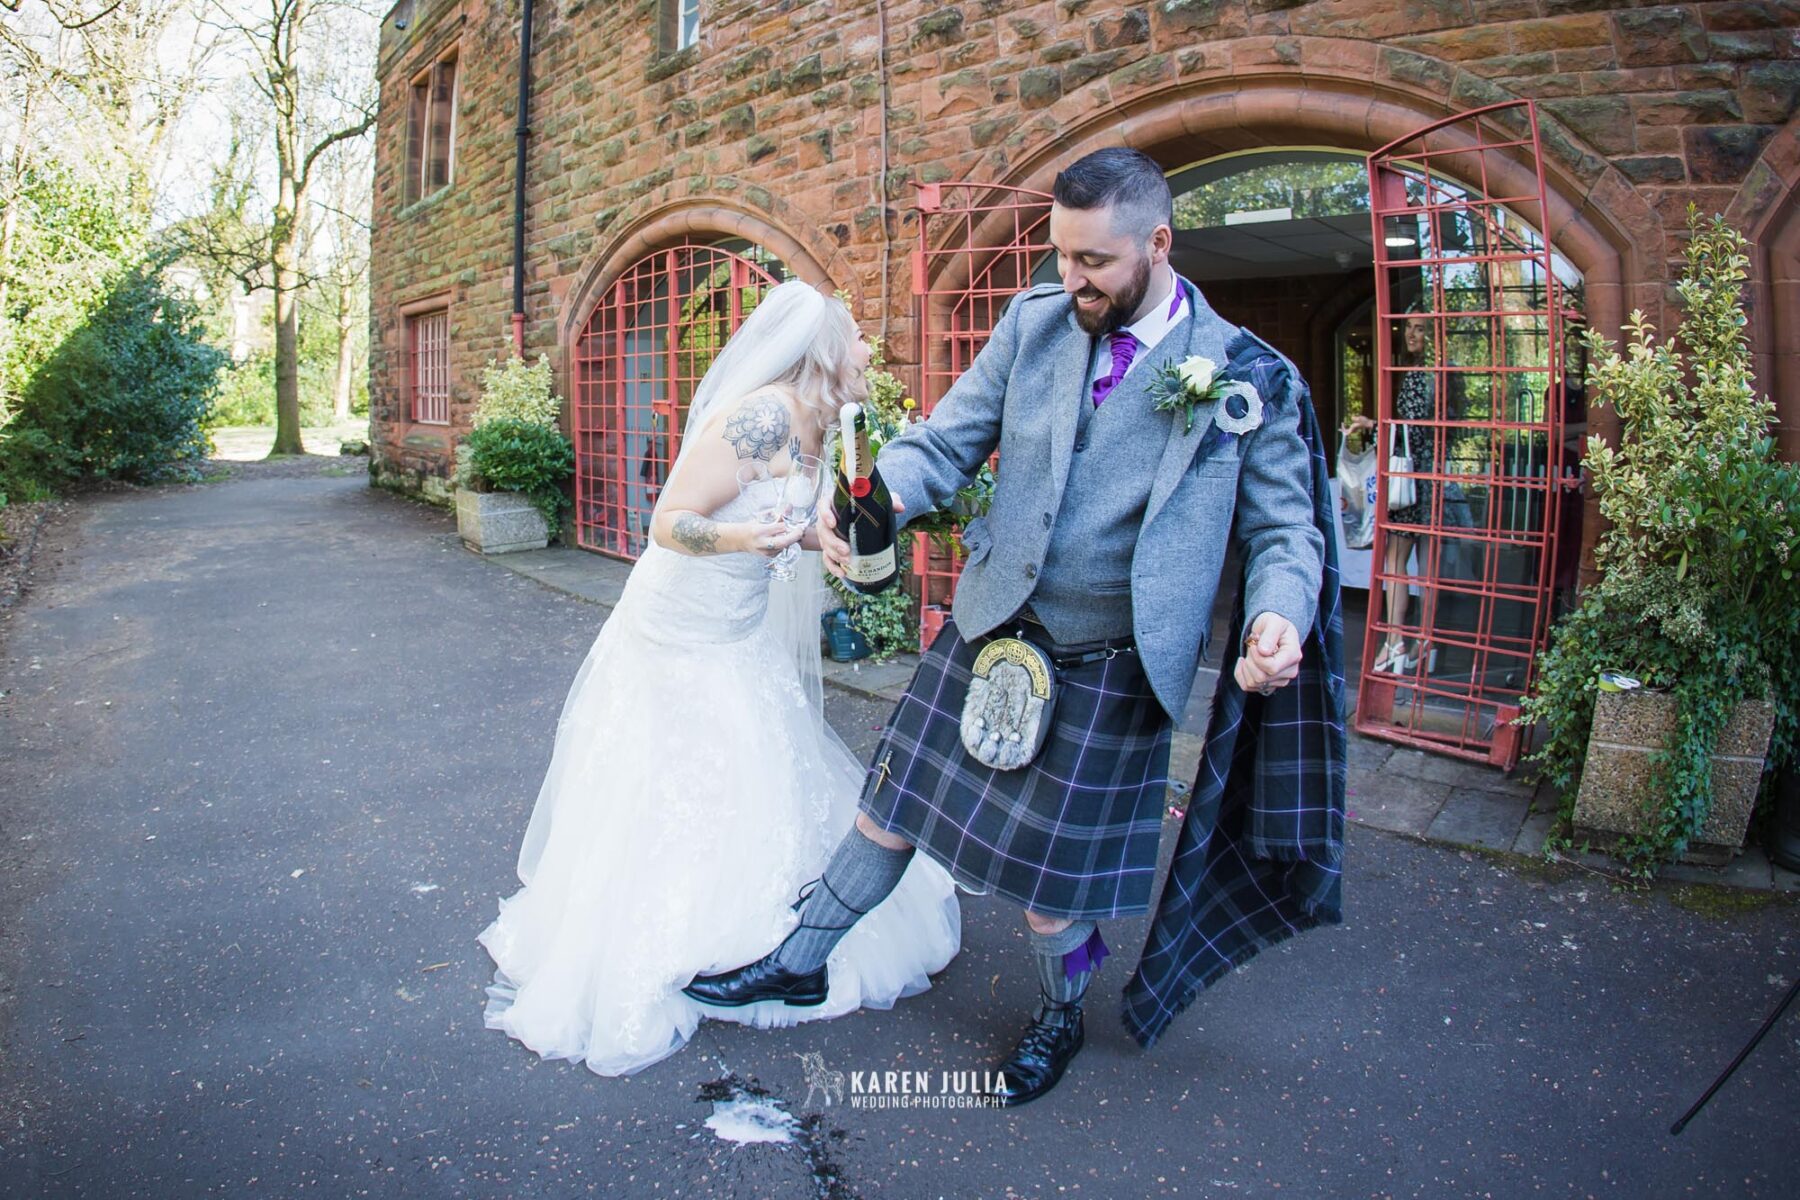 champagne goes everywhere, narrowly missing the brides dress, outside Pollockshields Burgh Hall